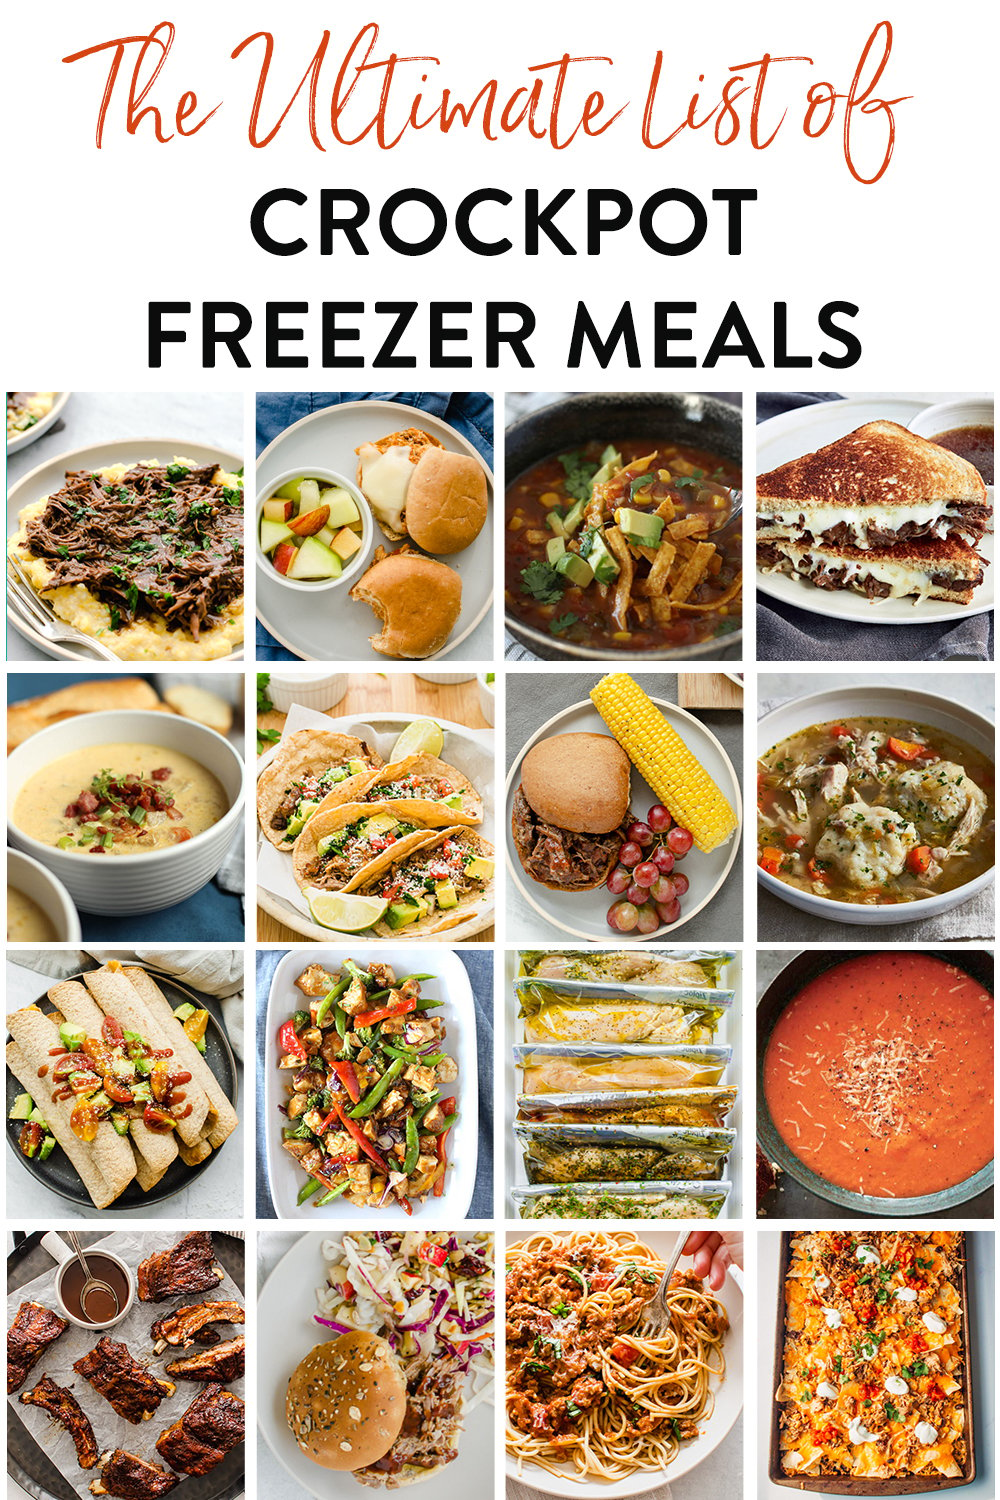 Collage of recipes from the ultimate list of crockpot freezer meals.